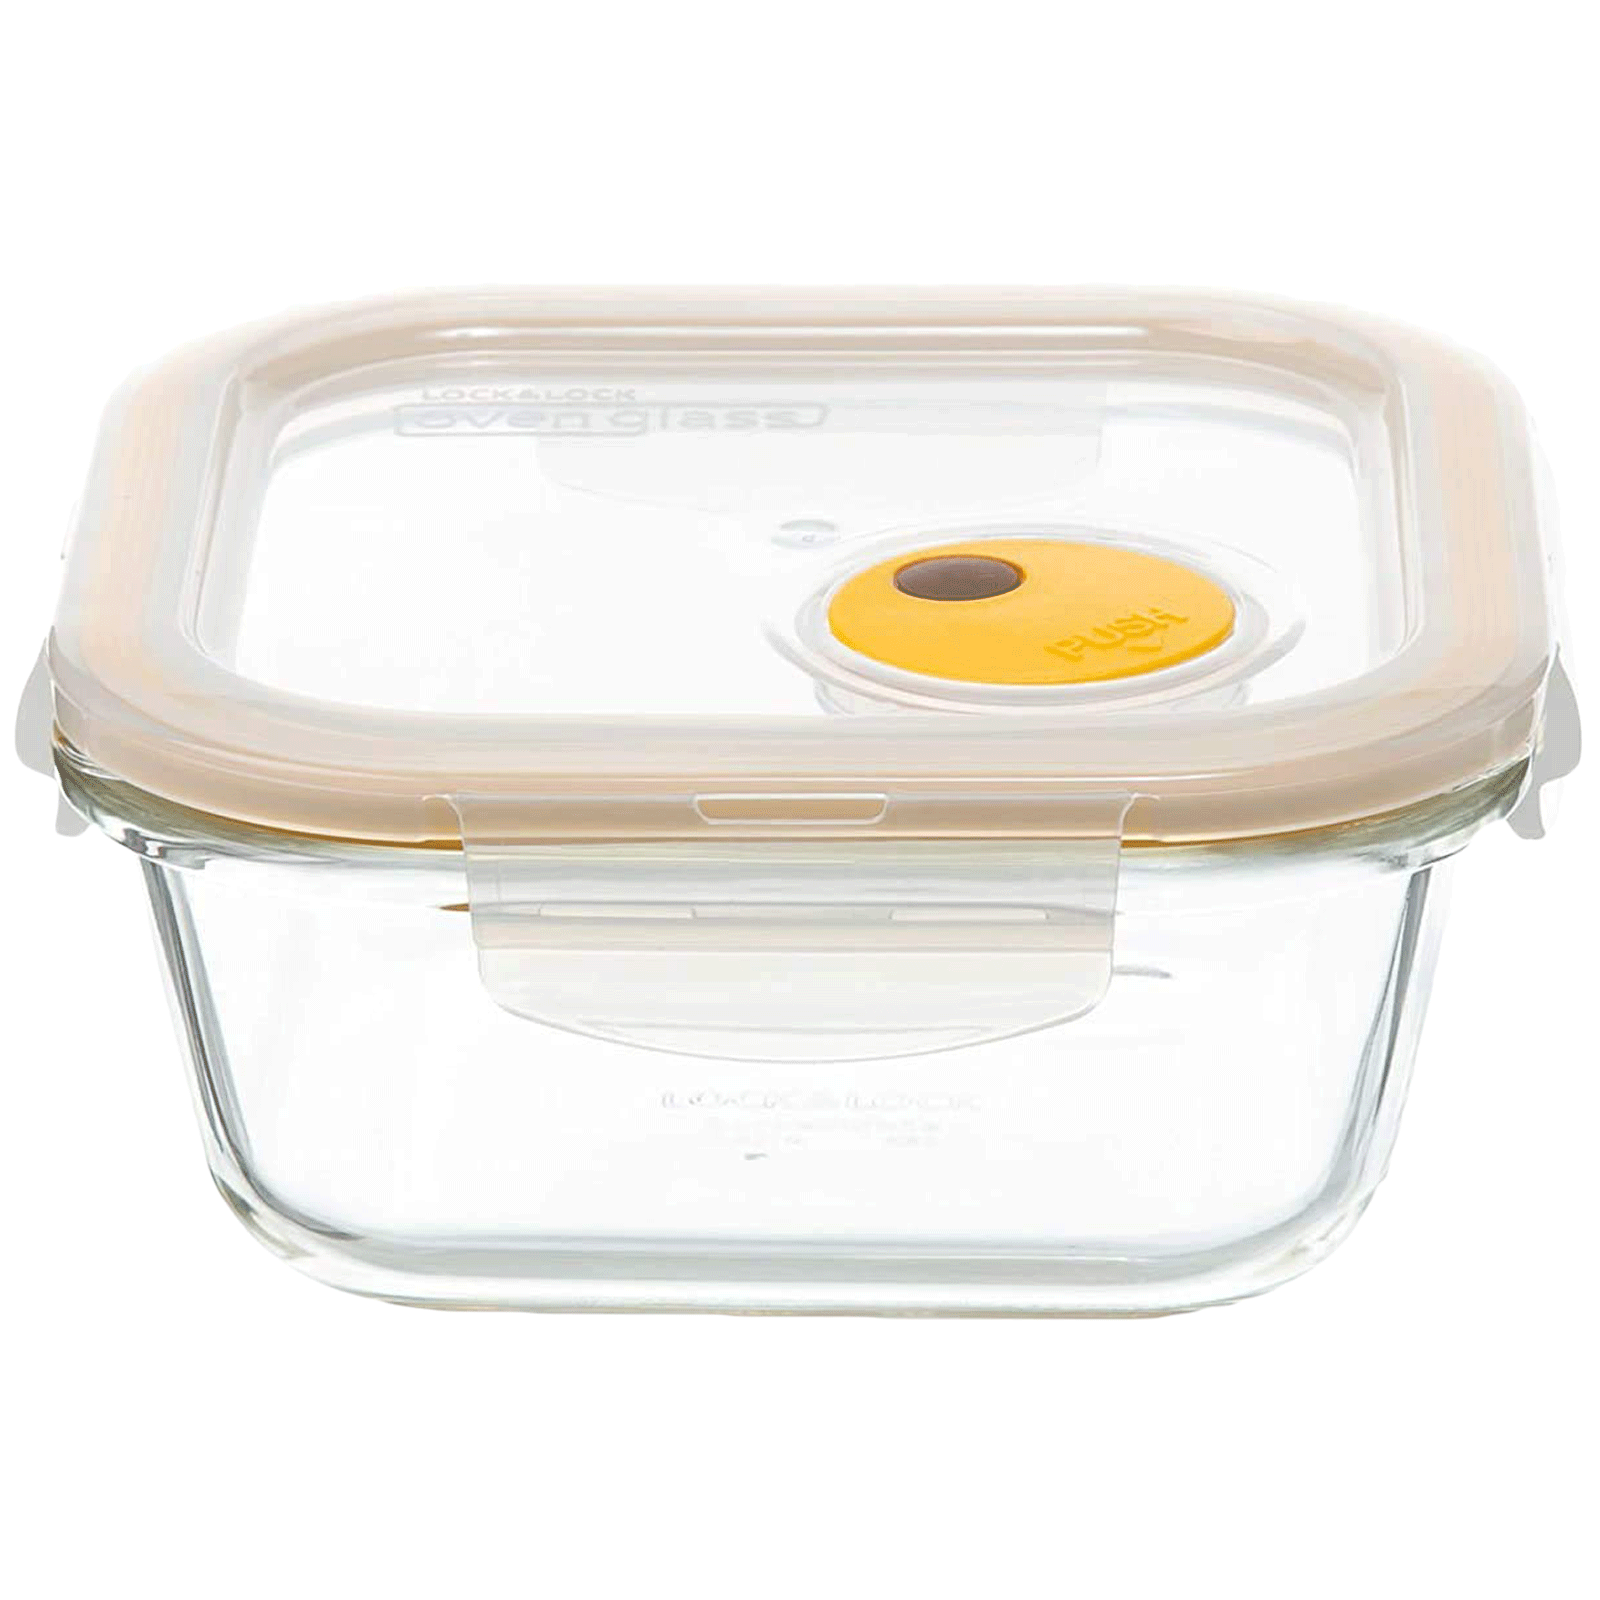 Lock & Lock 500 ml Square Glass Storage Container (Steam Hole, LLG214T, Transparent)